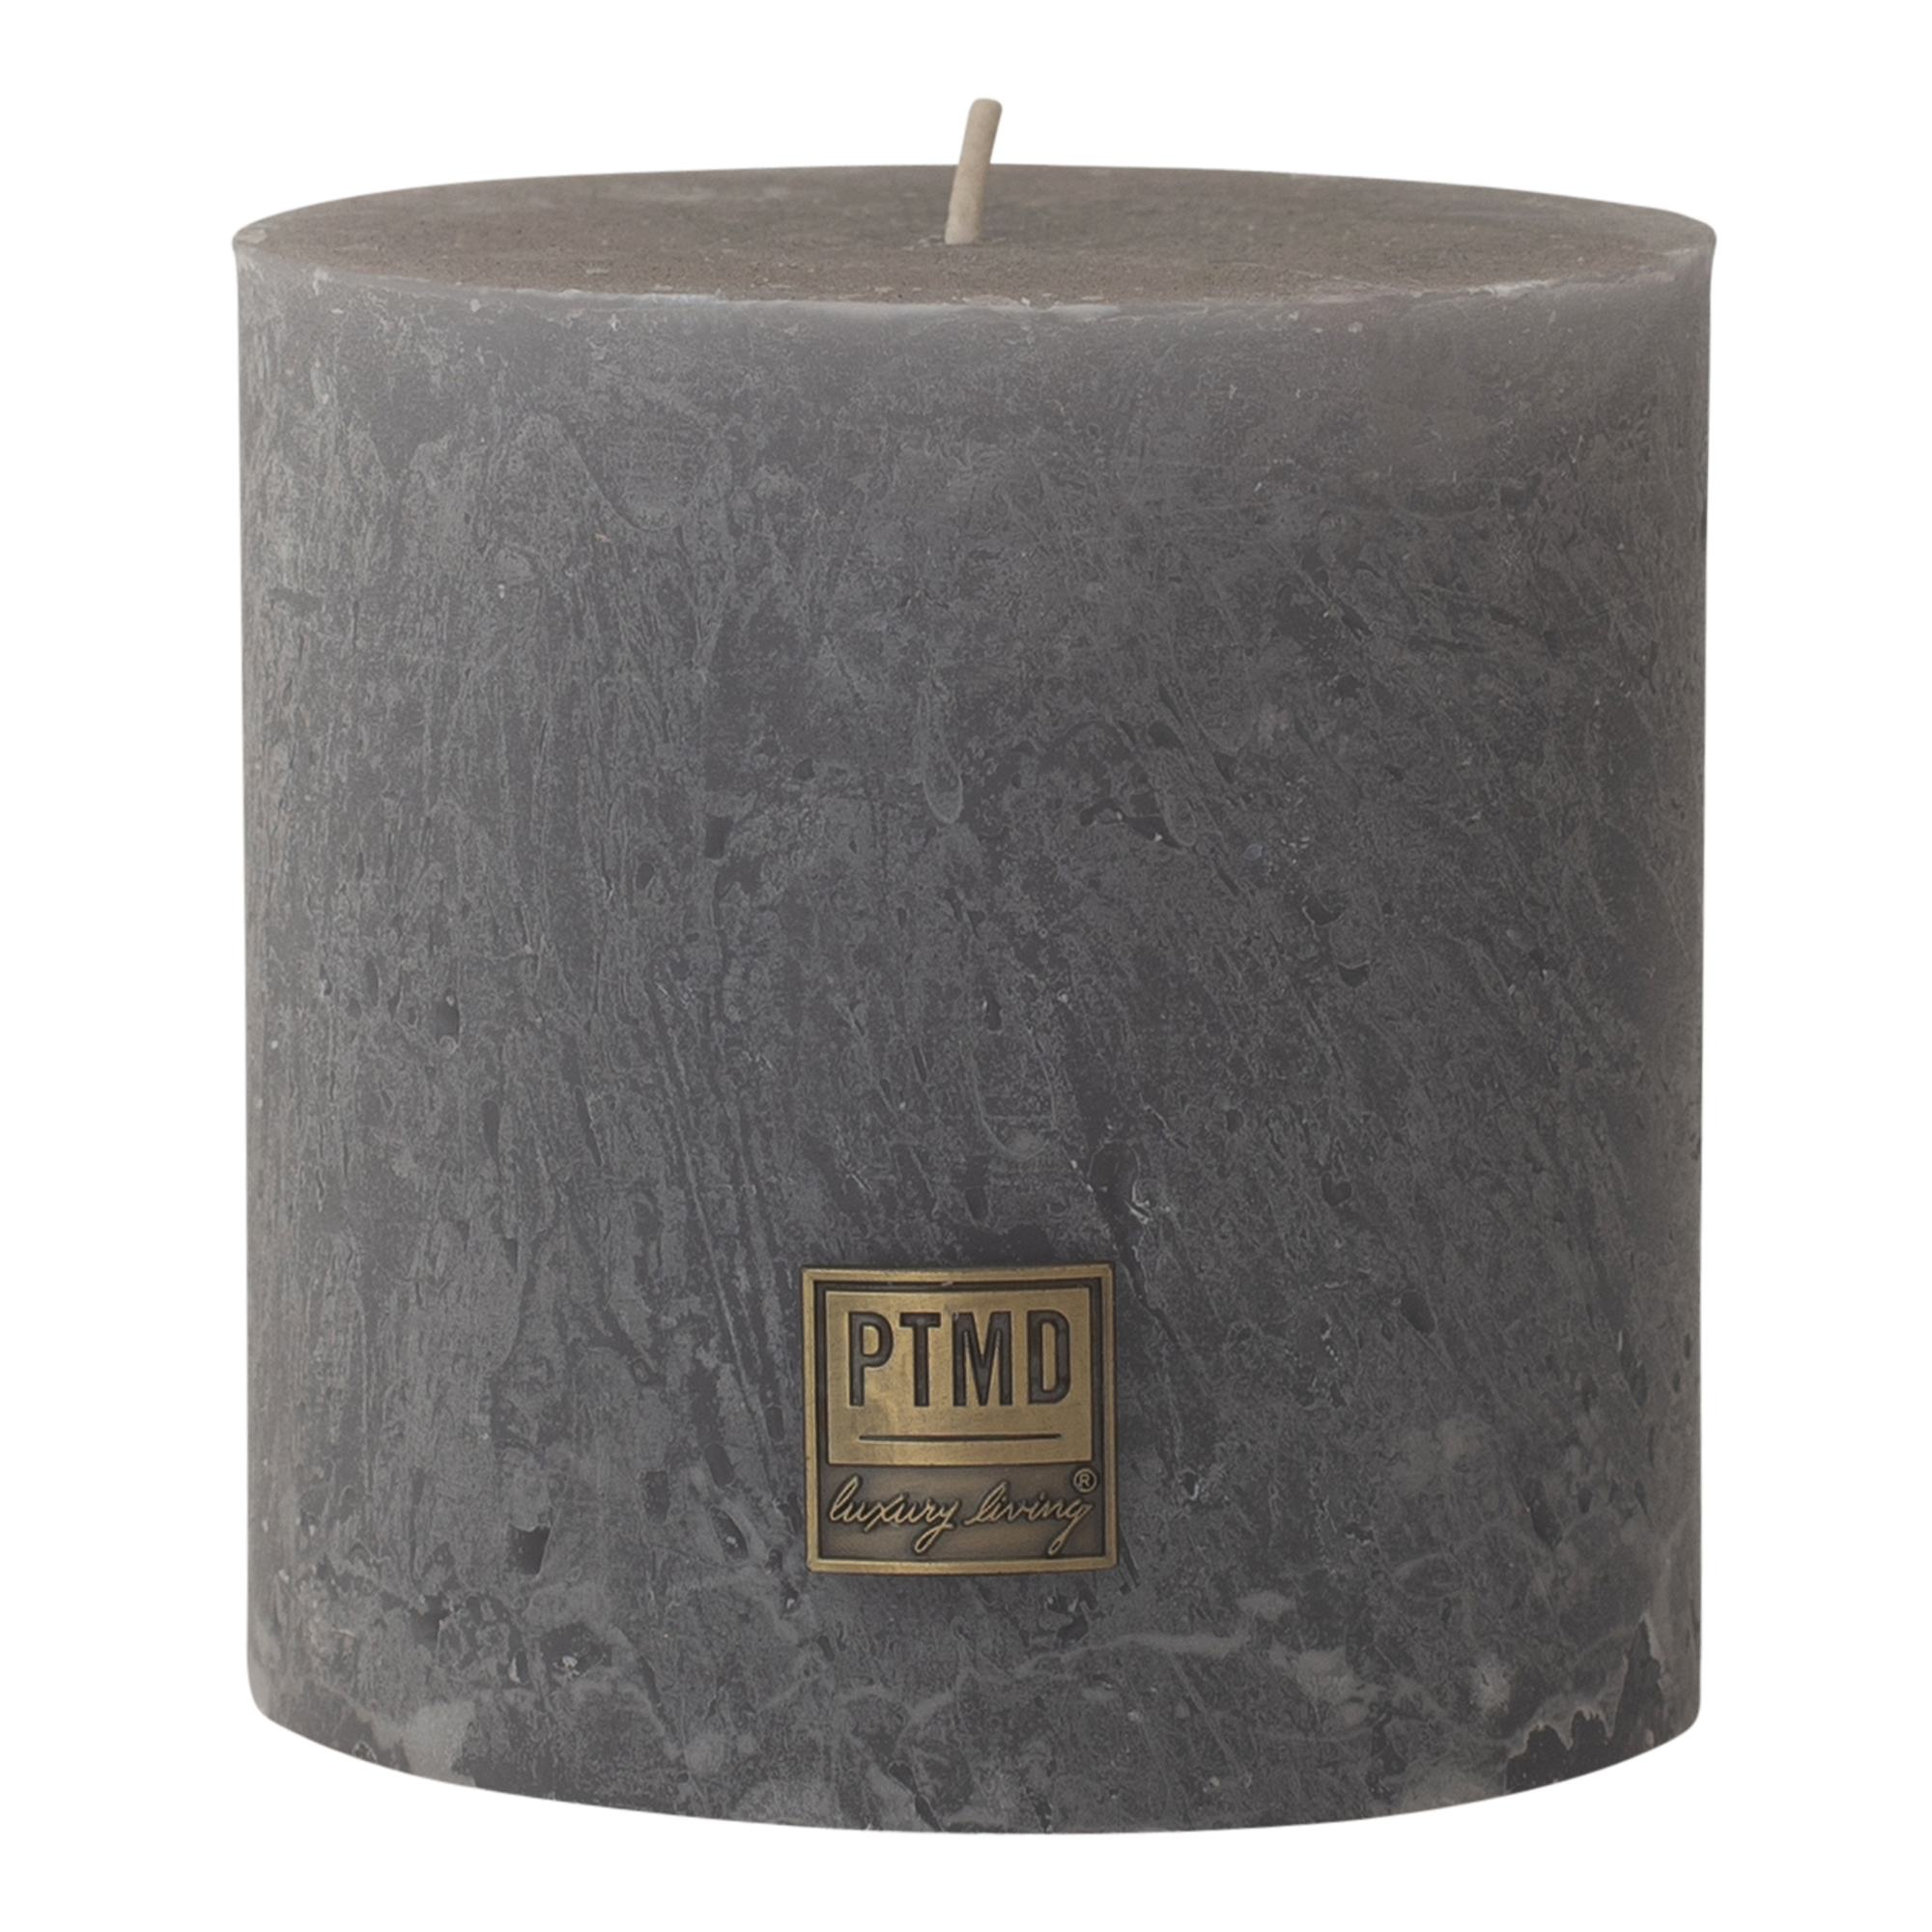 ptmd-10-x-10cm-suede-grey-rustic-block-candle